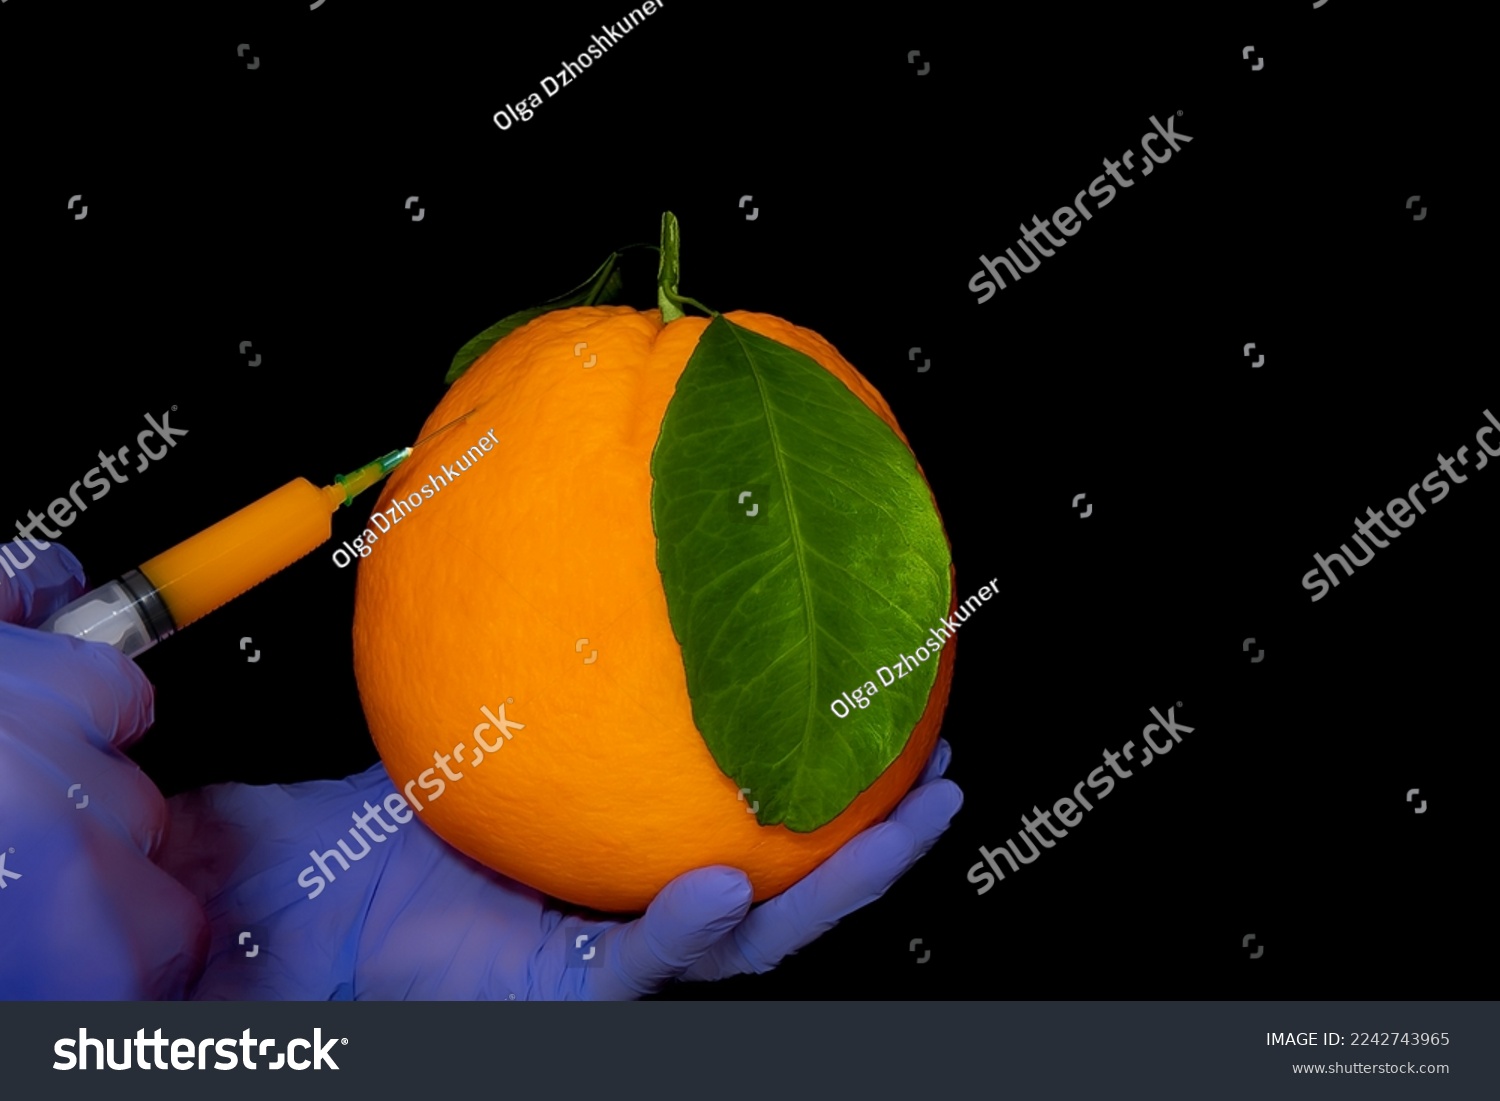 Orange with inserted syringe . Grapefruit symbolizes the fear of injections. Fruit contamination with chemicals. Genetic modification of food #2242743965